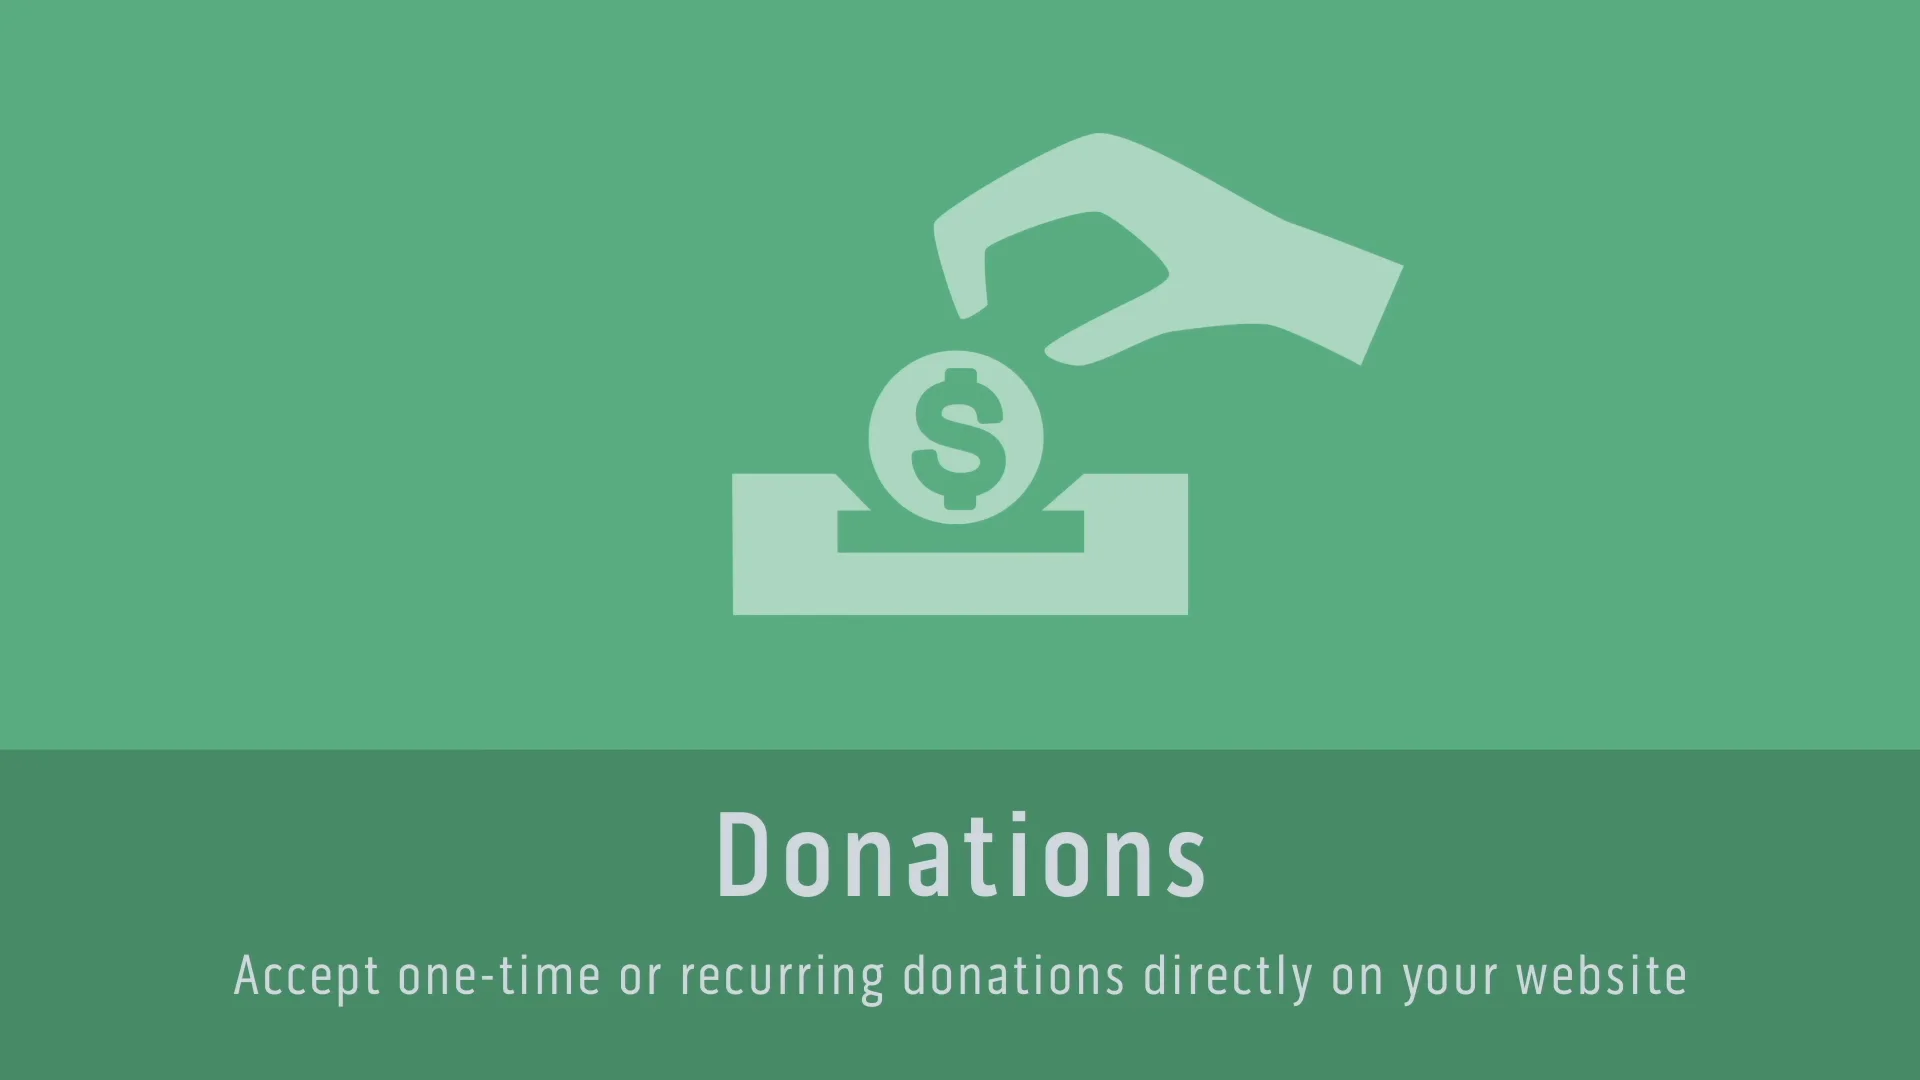 Donation (one-time)